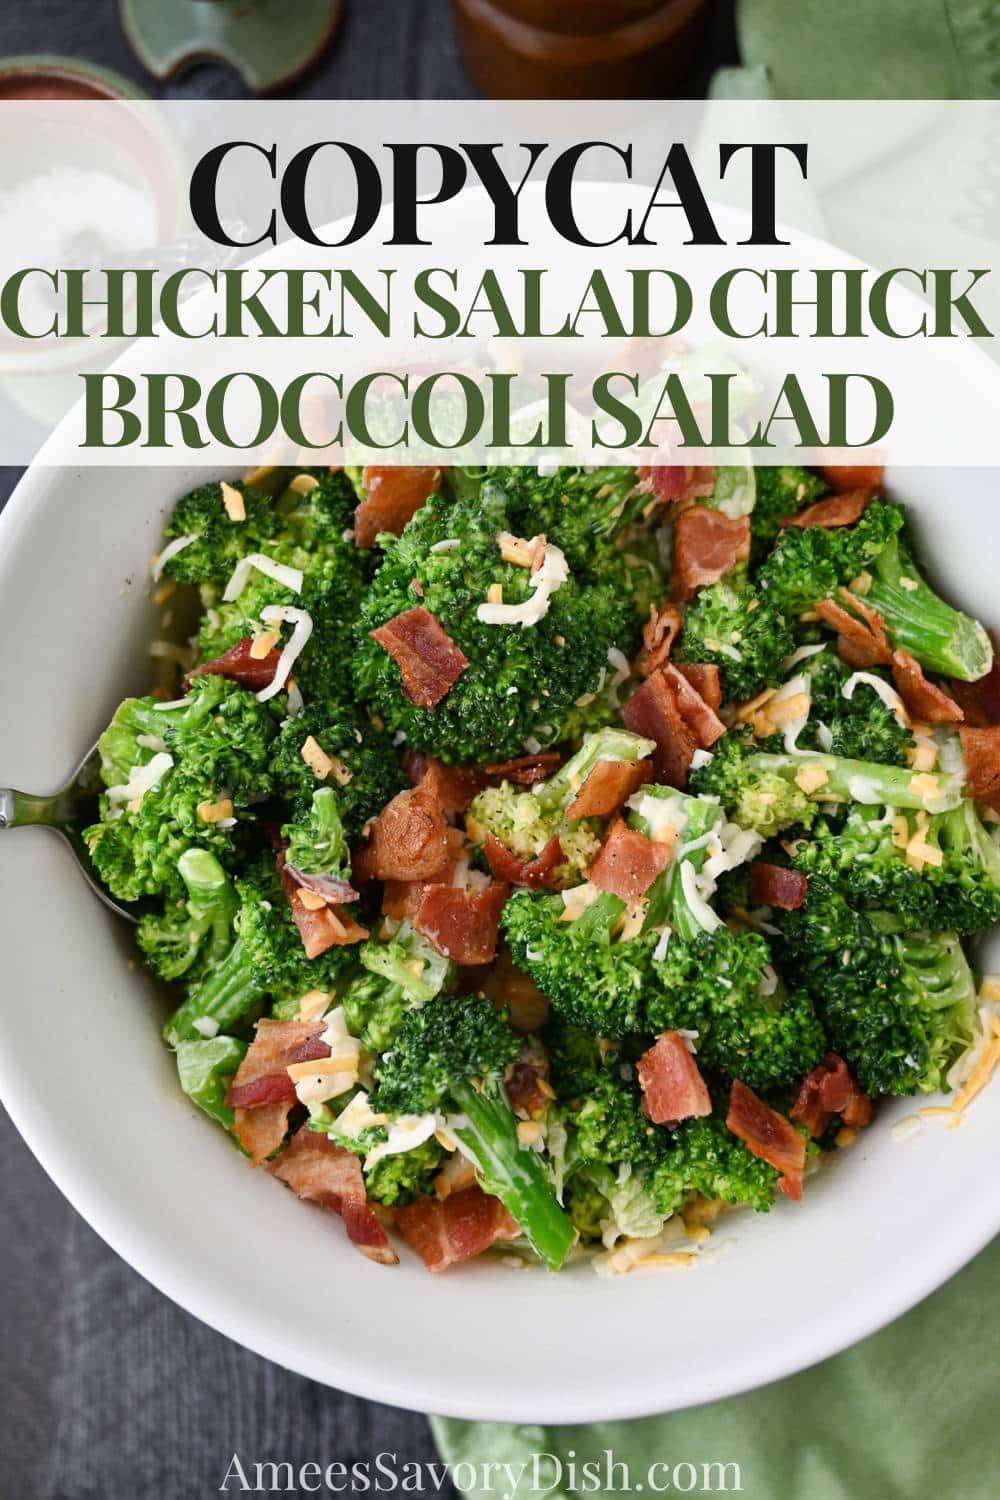 This simple and delicious Chicken Salad Chick Broccoli Salad copycat is easy to make with only 7 simple ingredients! via @Ameessavorydish